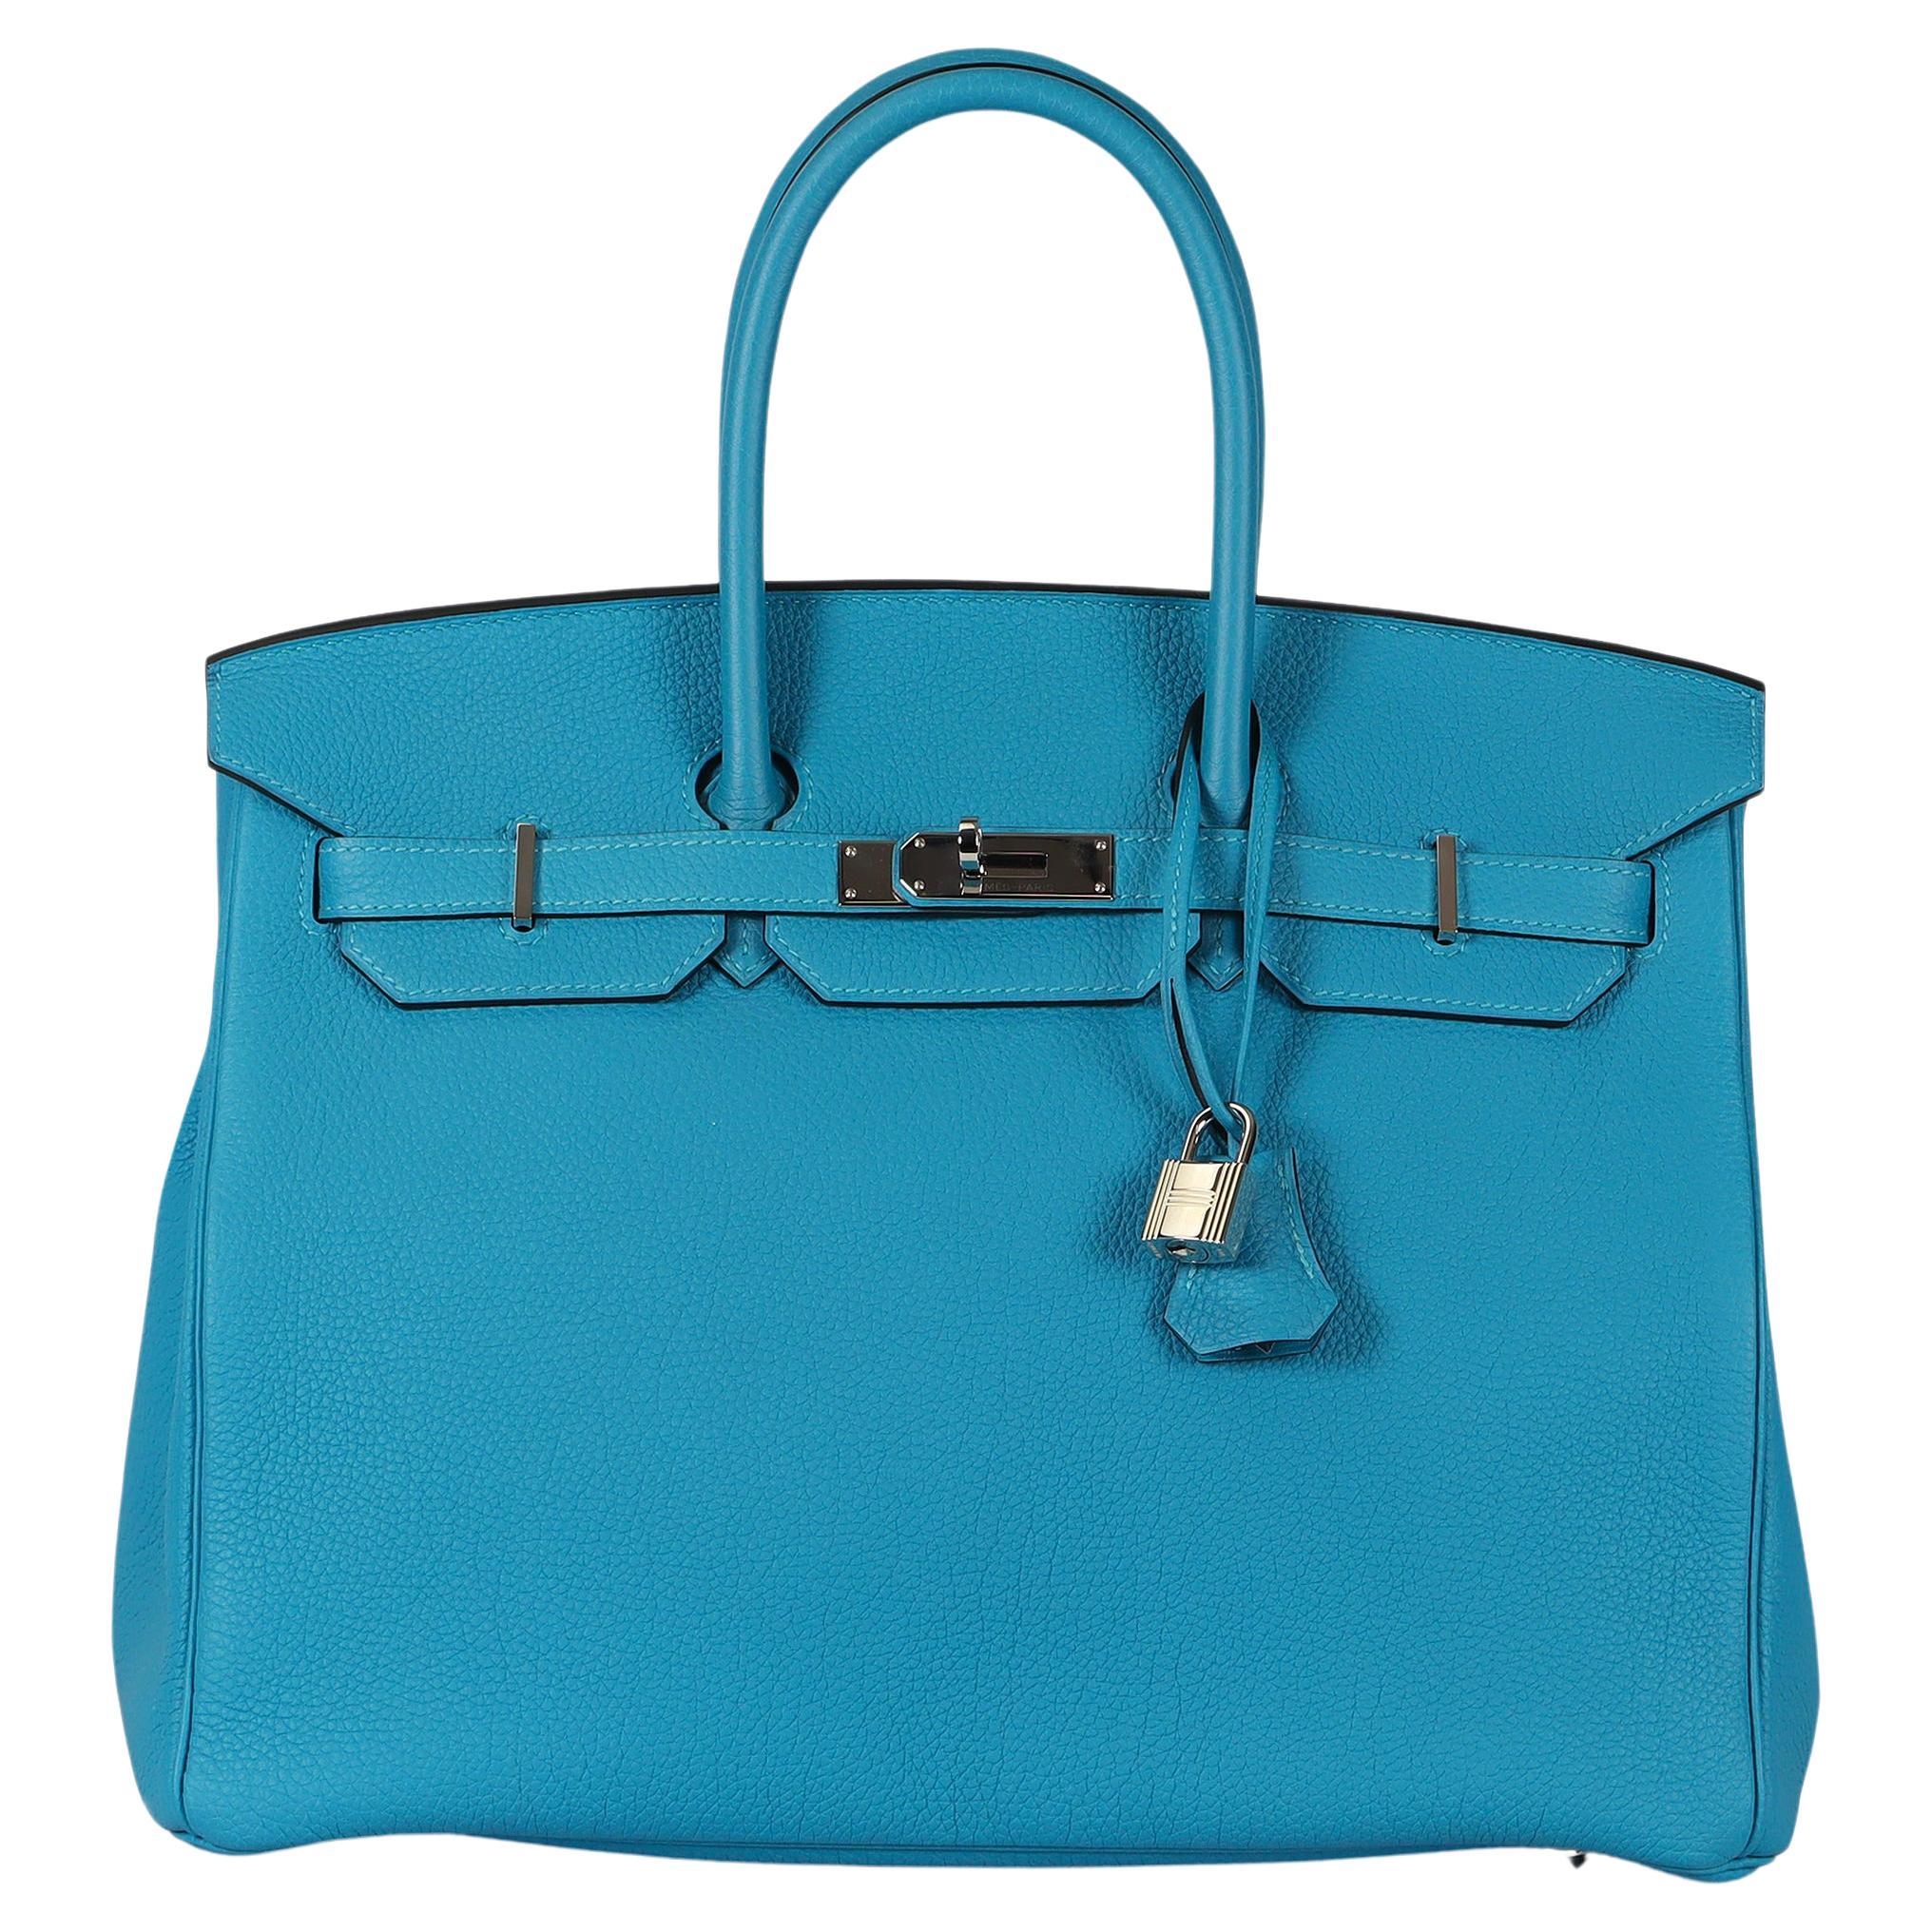 How long is the wait for a Birkin bag?